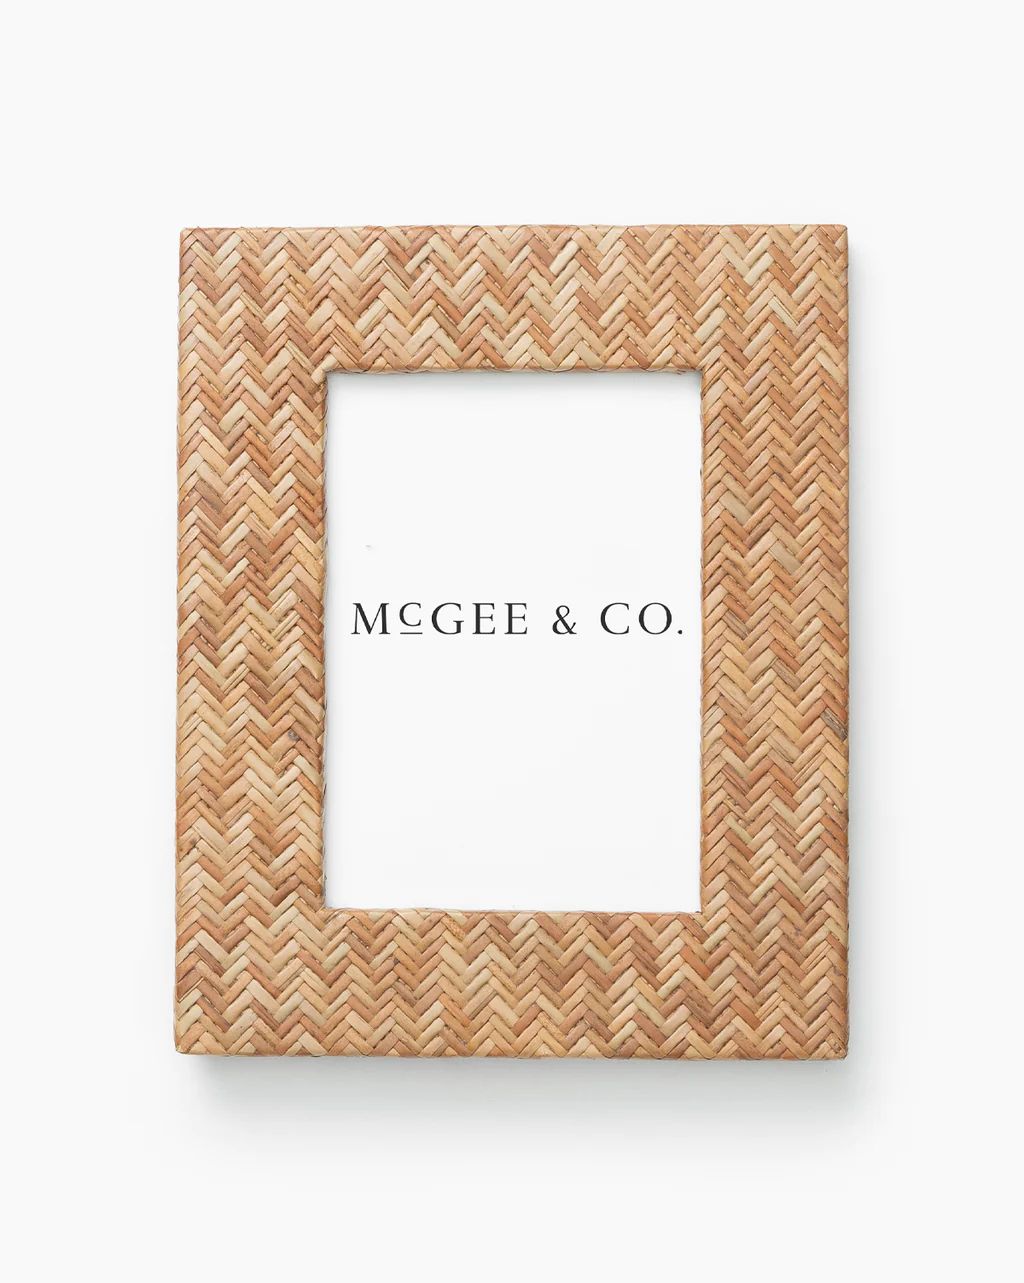 Double Weave Frame | McGee & Co.